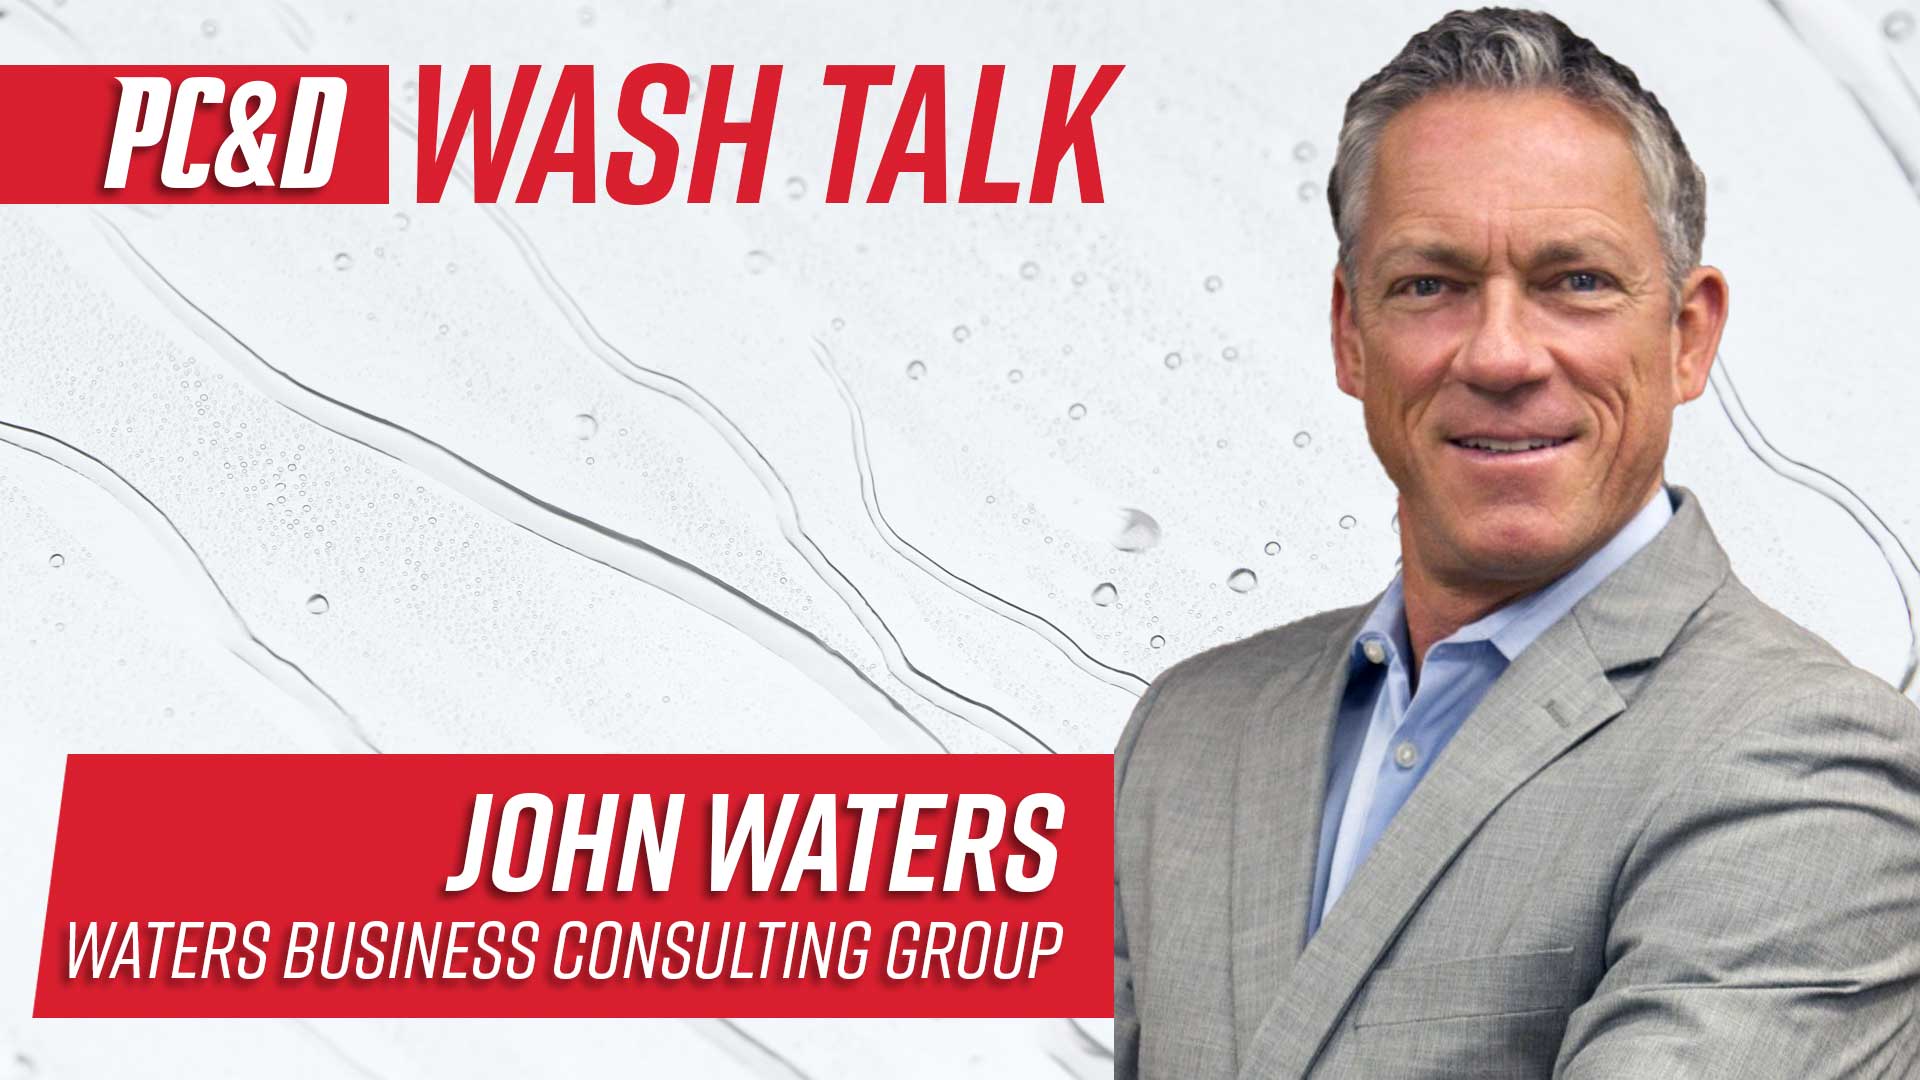 Creating a winning culture with John Waters